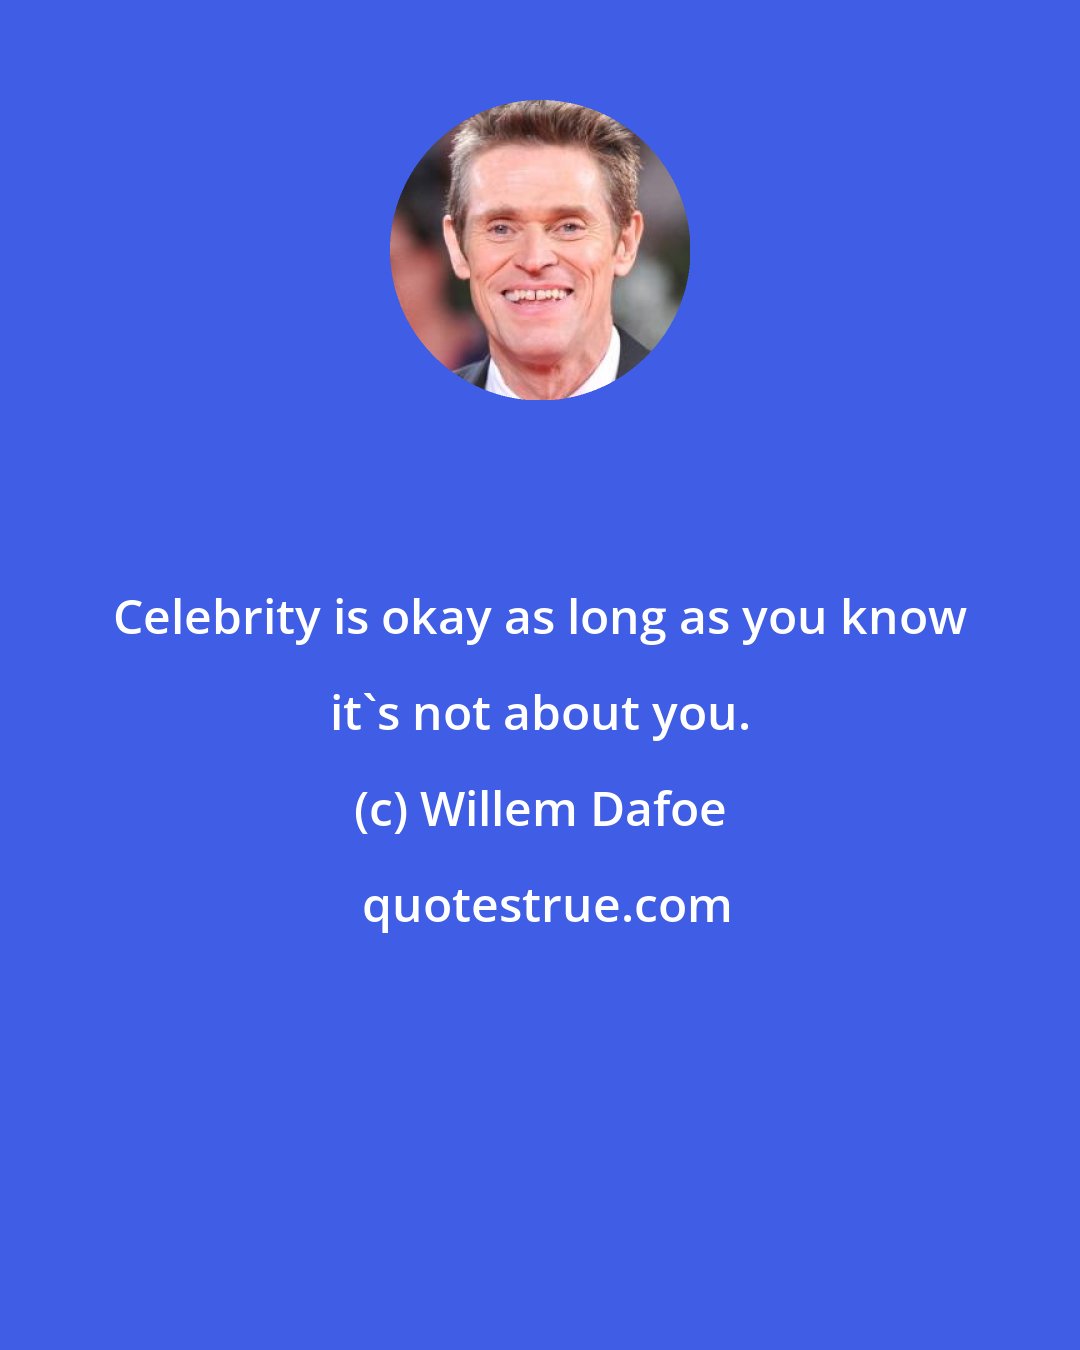 Willem Dafoe: Celebrity is okay as long as you know it's not about you.